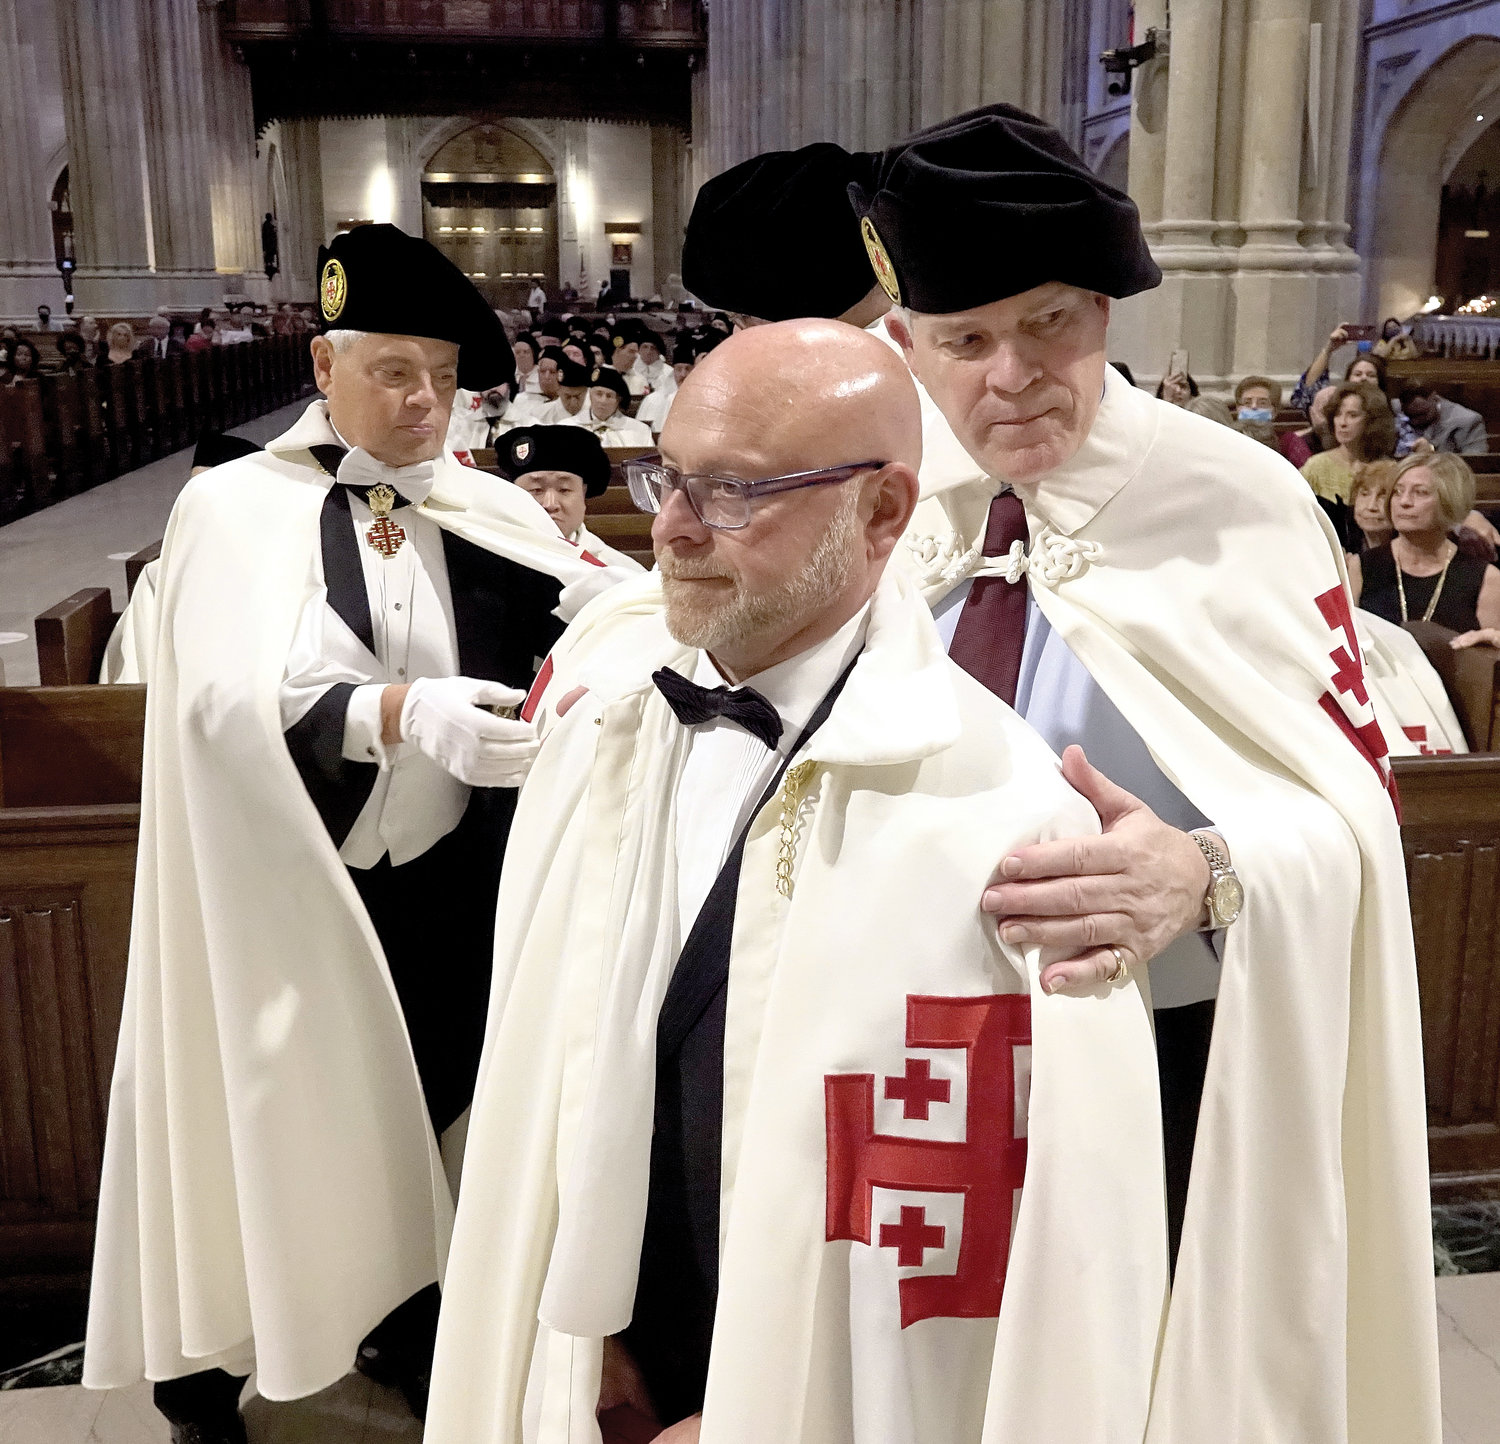 INVESTED—The Equestrian Order of the Holy Sepulchre of Jerusalem’s Eastern Lieutenancy of the United States invested 56 knights and dames and promoted 88 members at a ceremony and Mass Oct. 16 at St. Patrick’s Cathedral. A newly invested knight has his cape adjusted.